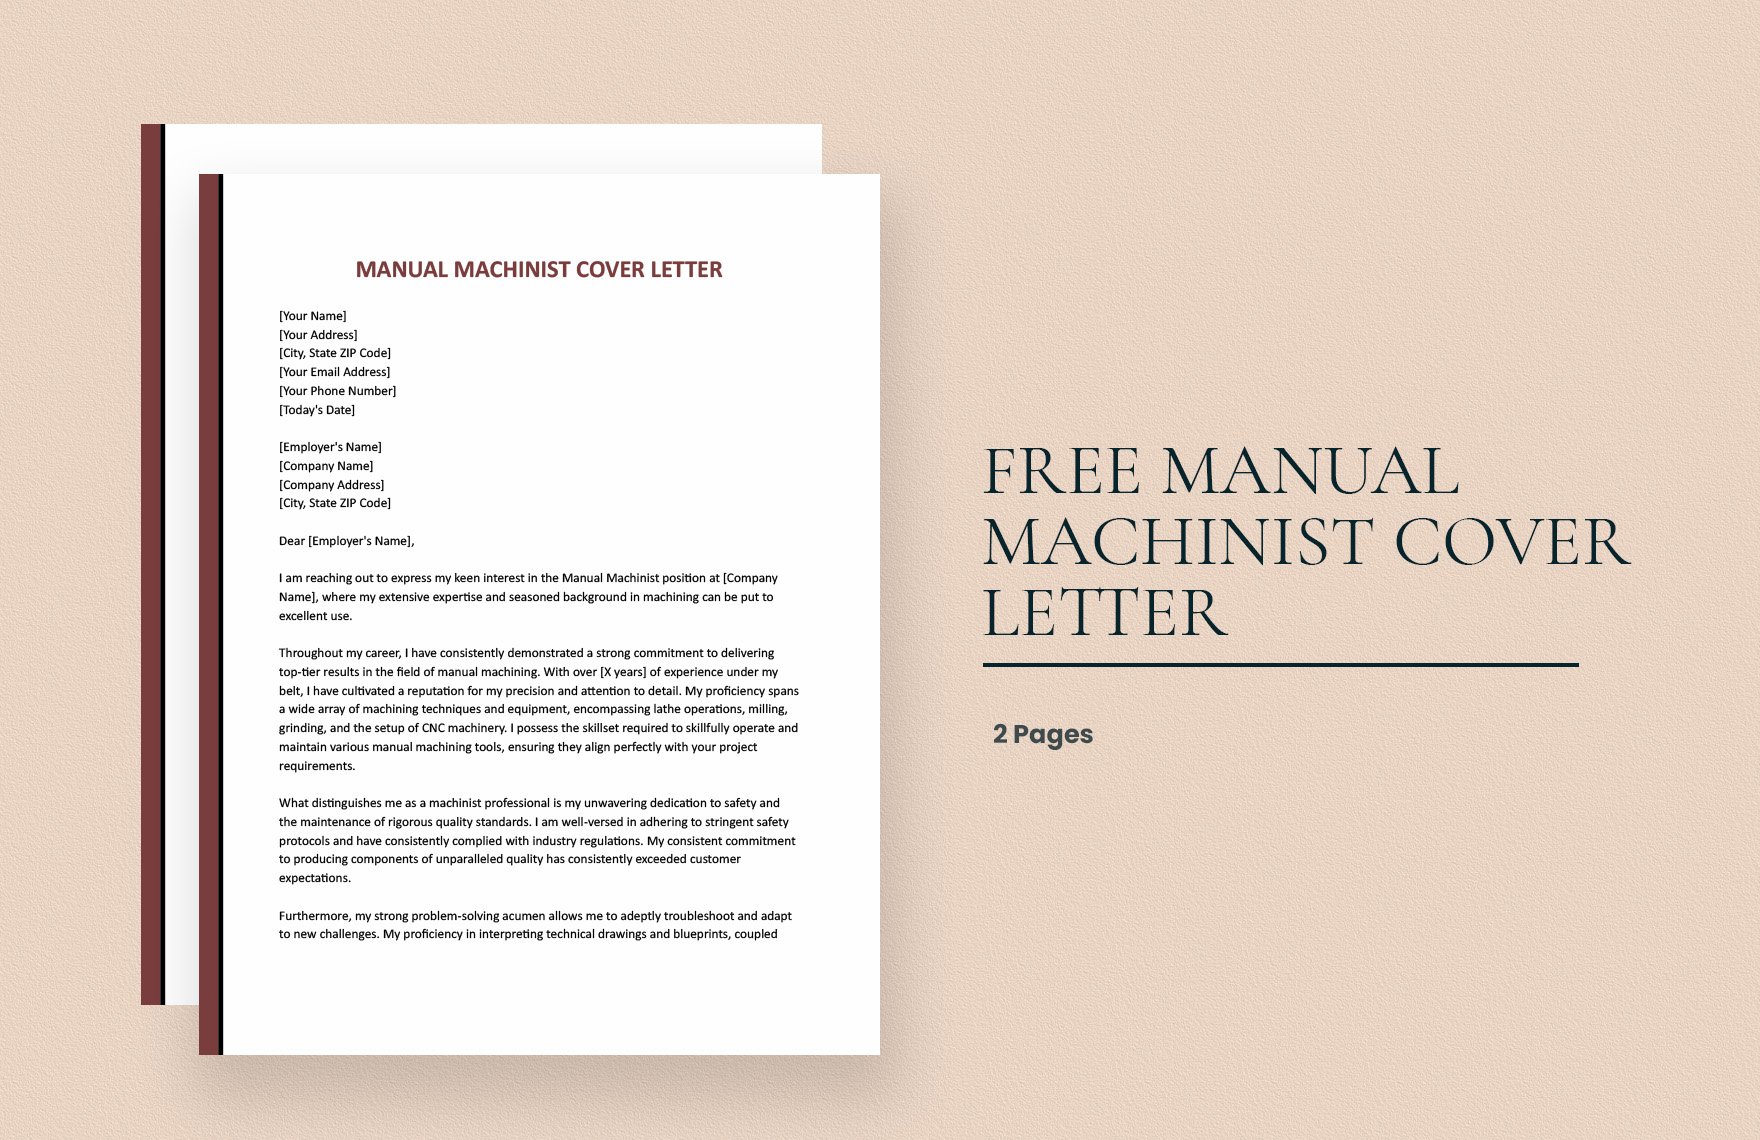 Free Manual Machinist Cover Letter in Word, Google Docs